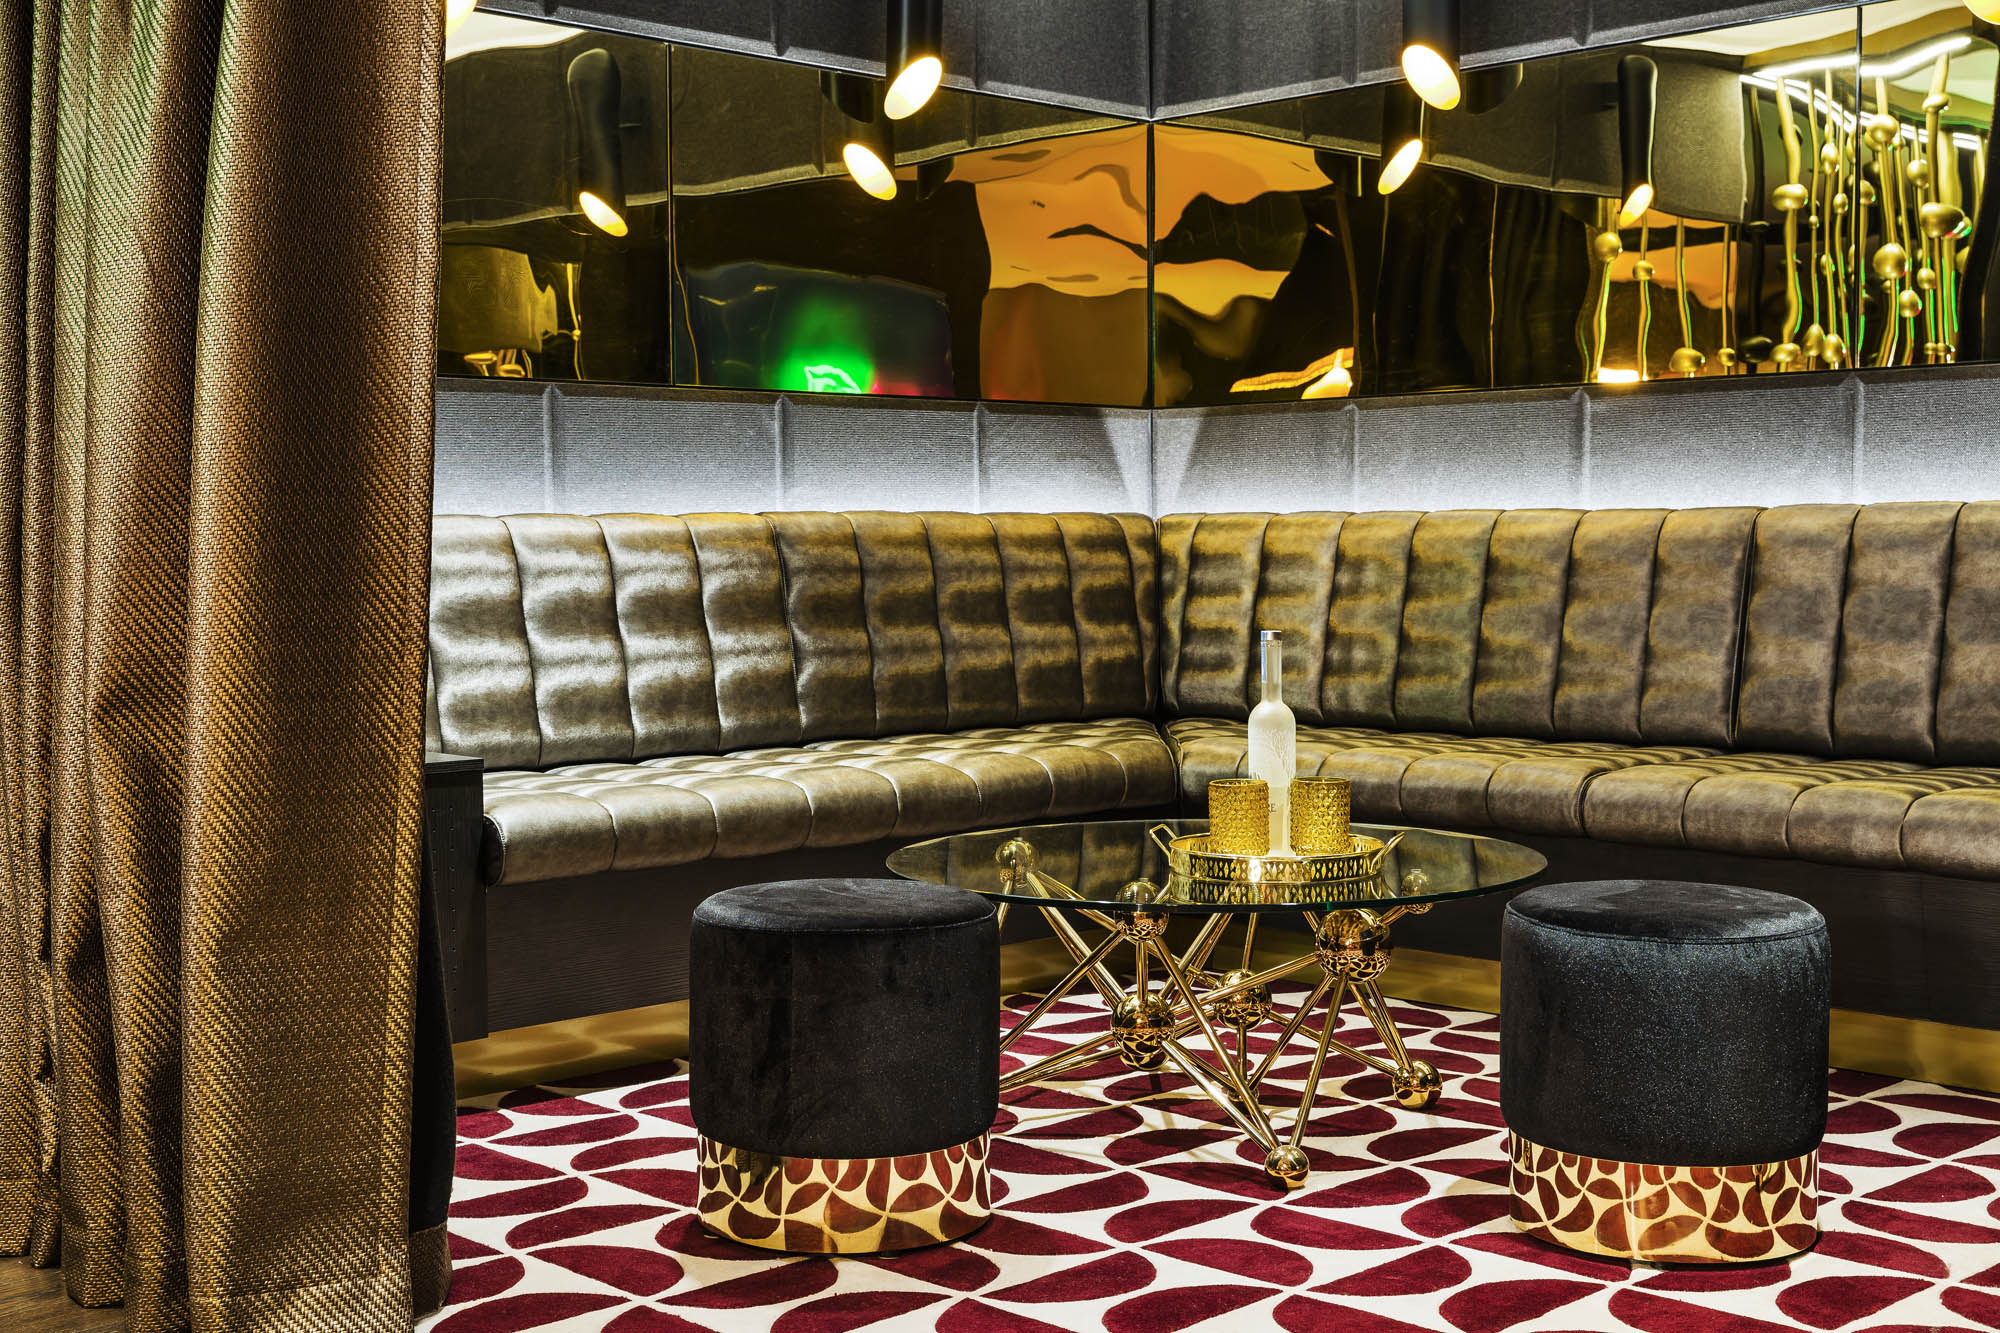 studios at the star sydney hotels design and construct nsw 70s glam mirrored walls neon lights ottomans gold